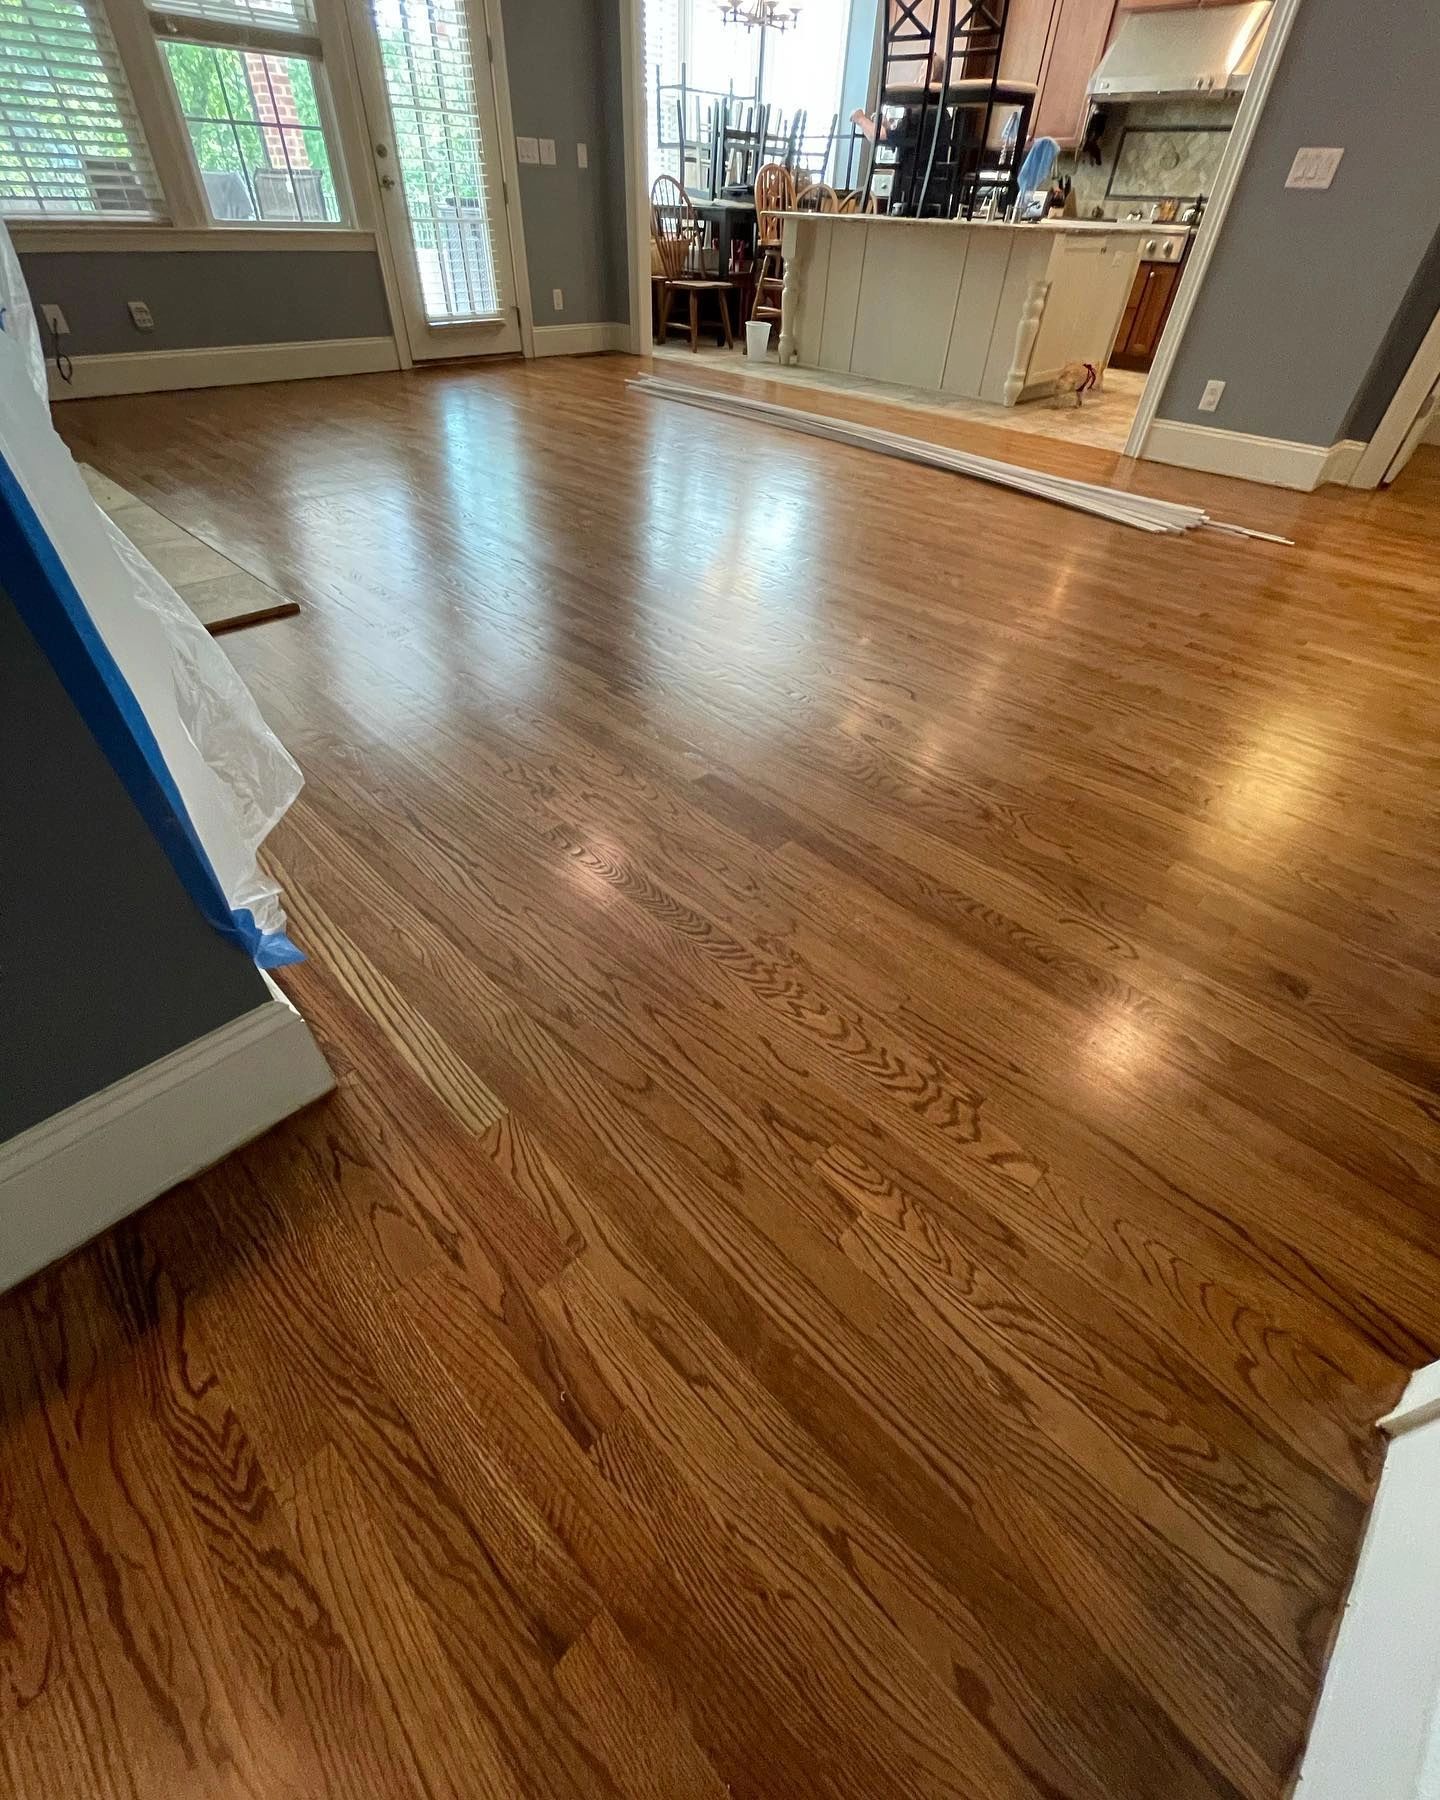 Hardwood installation and refinishing by M&M Flooring in Fort Mill, SC.